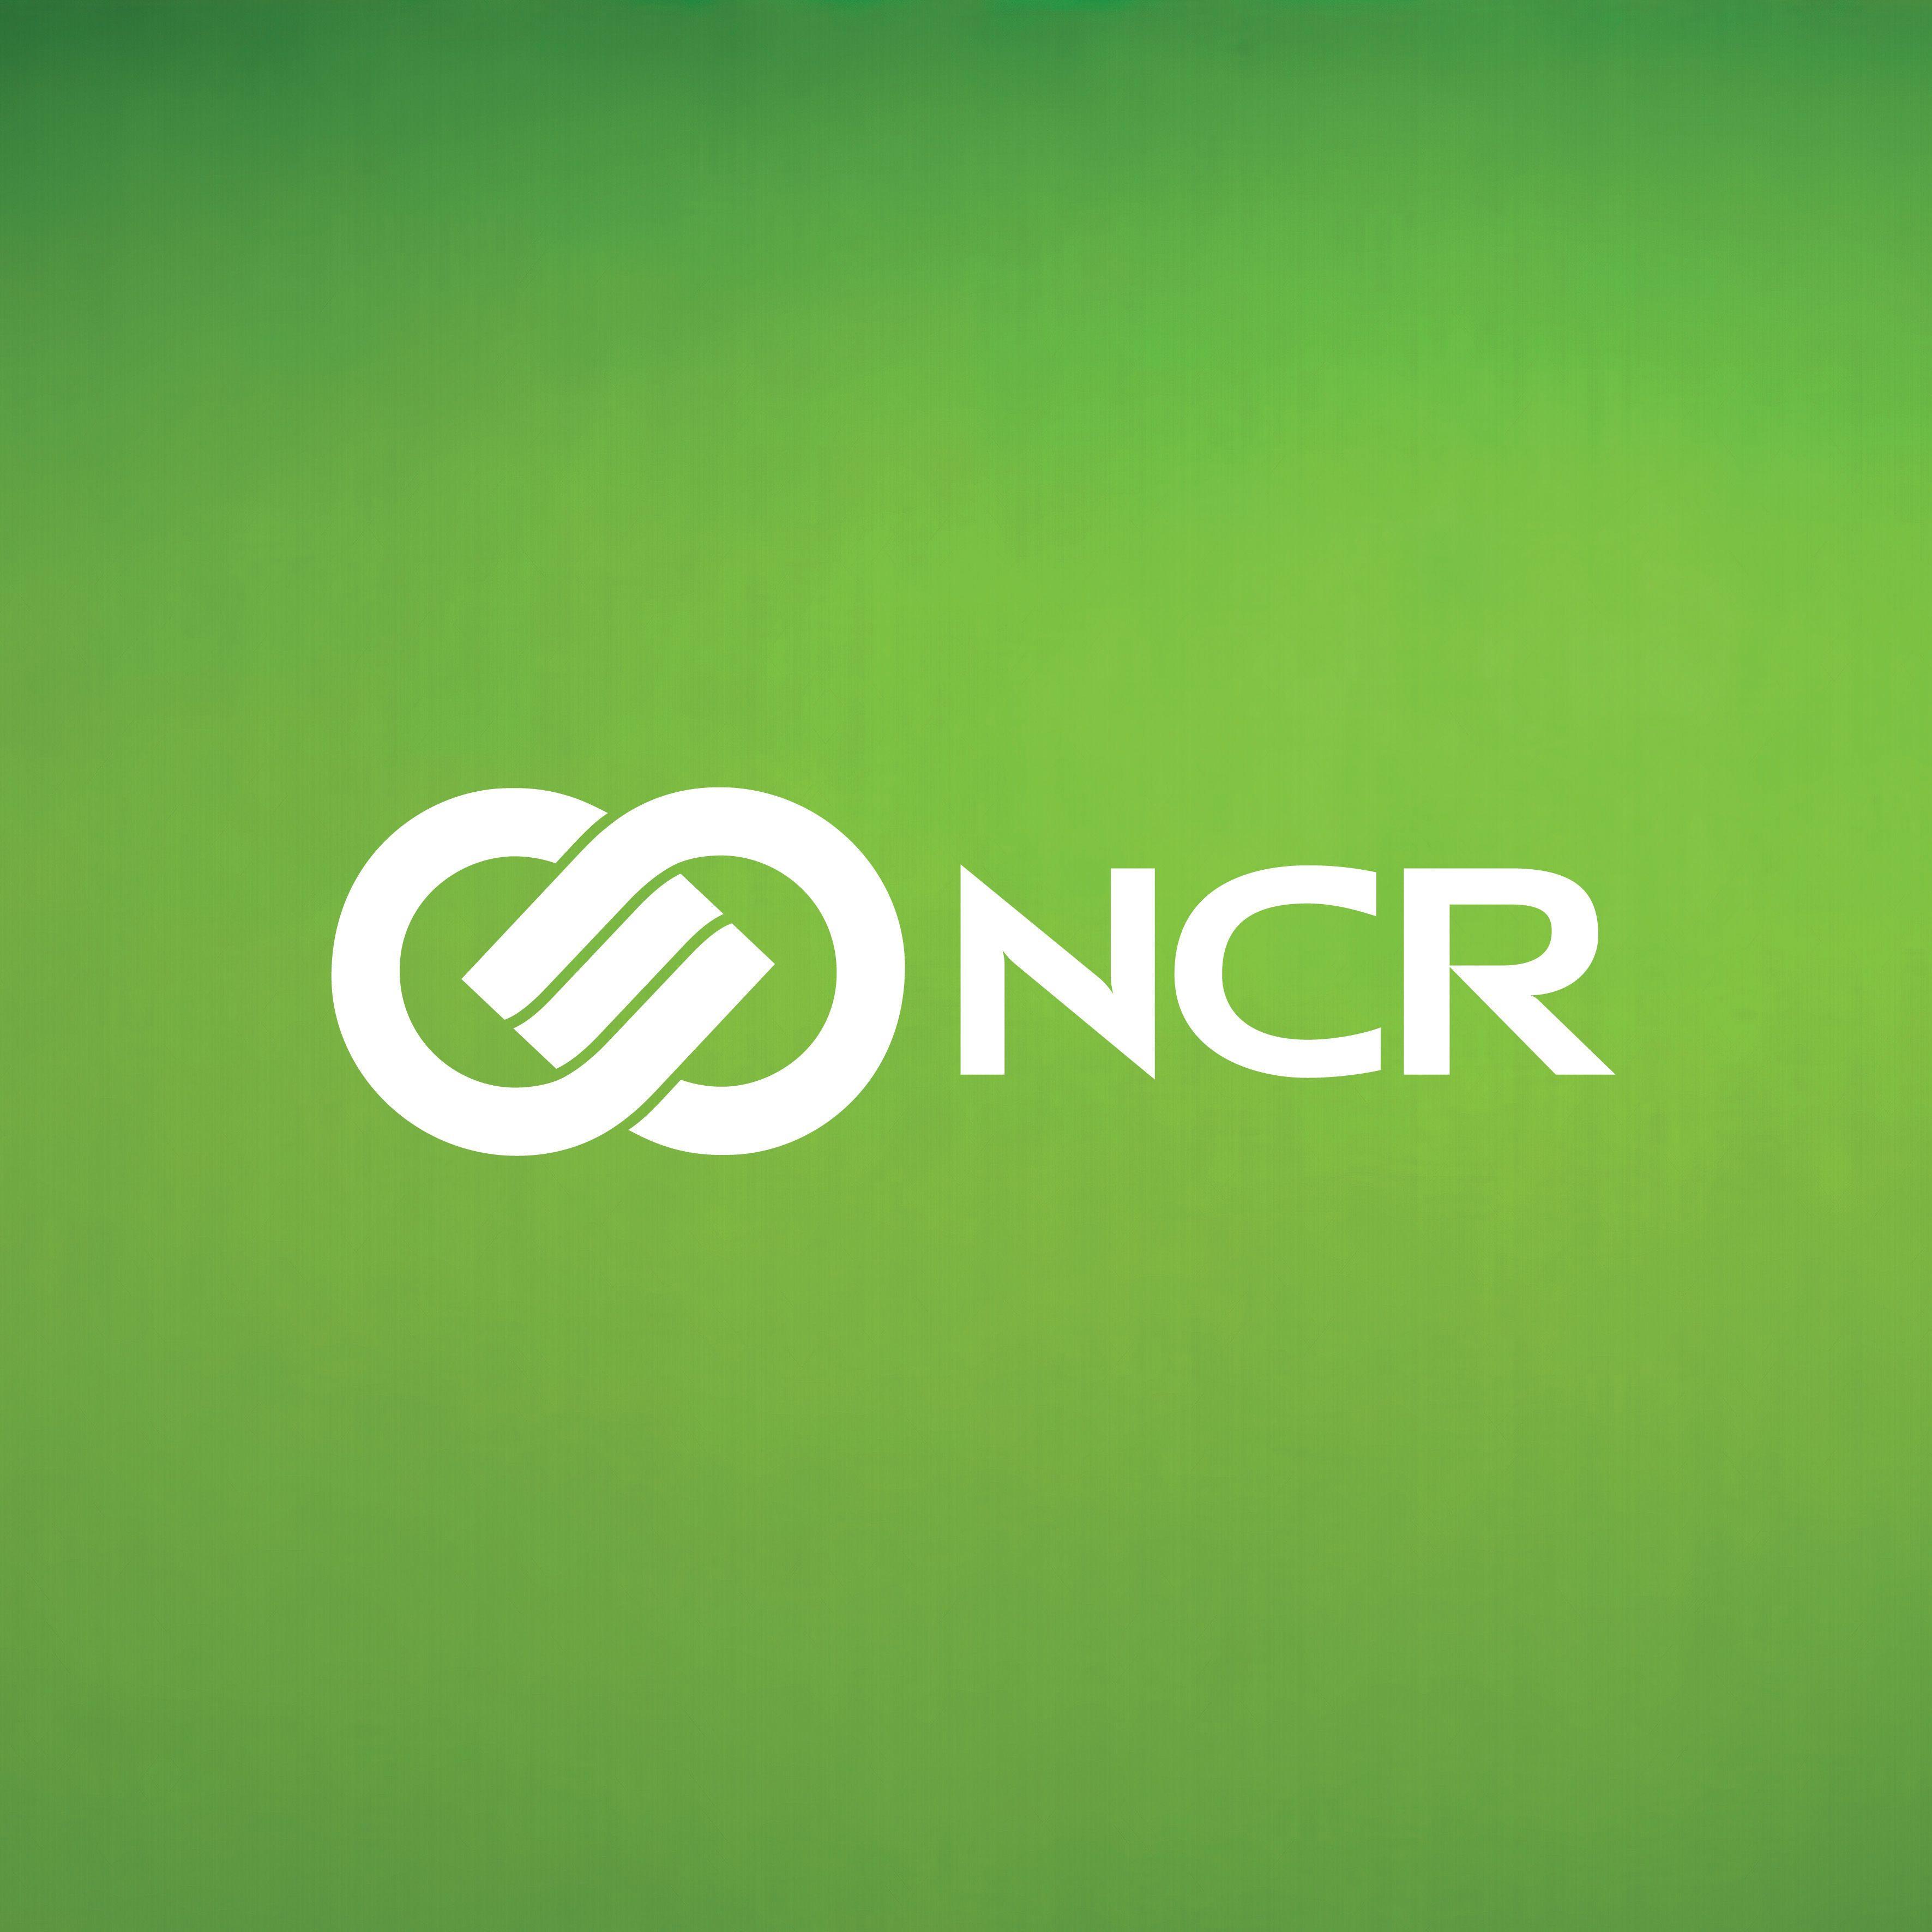 Green Payment Business Logo - Payments Giant NCR to Integrate Bitcoin into Small Business Service